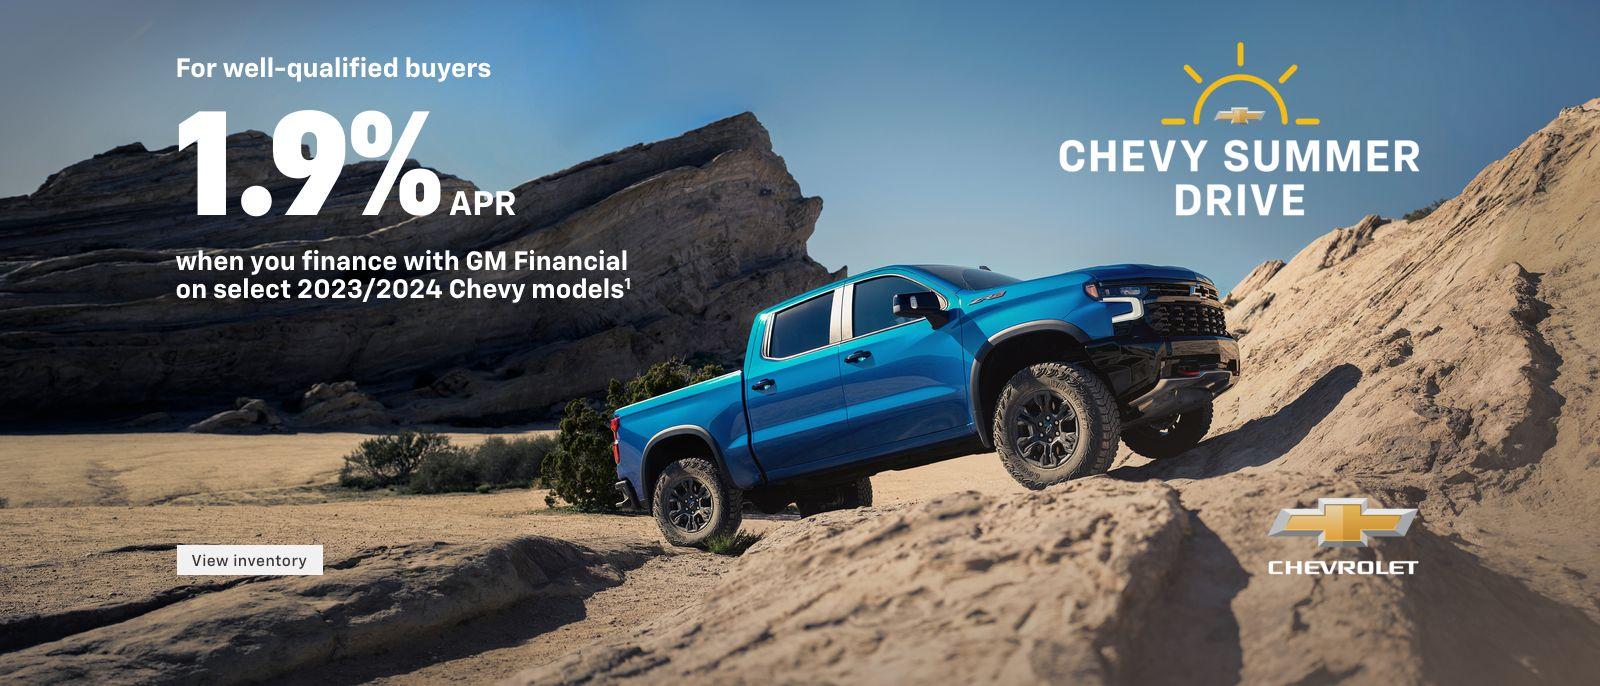 For well-qualified buyers 1.9% APR when you finance with GM Financial on select 2023/2024 Chevy models.